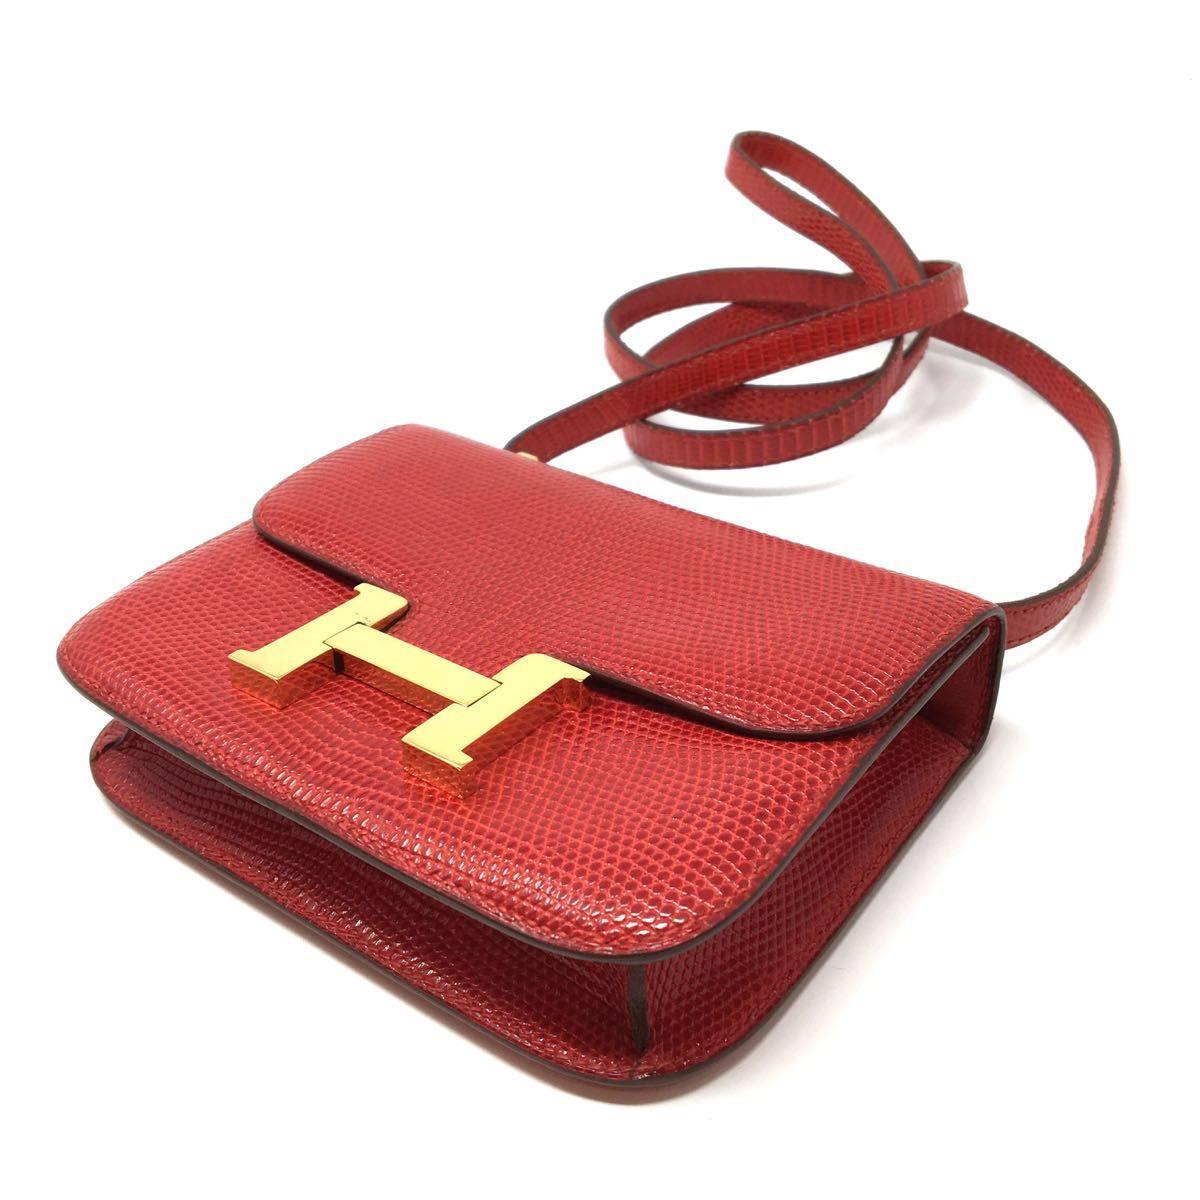 Hermes Paris Rare Mini Costance 20 cm Lizard Rouge Garance. The micro Constance is the smallest version of the impeccable craftsmanship of this line. It has no inside pockets and is lined in red leather. The hardware is gold tone and the shoulder